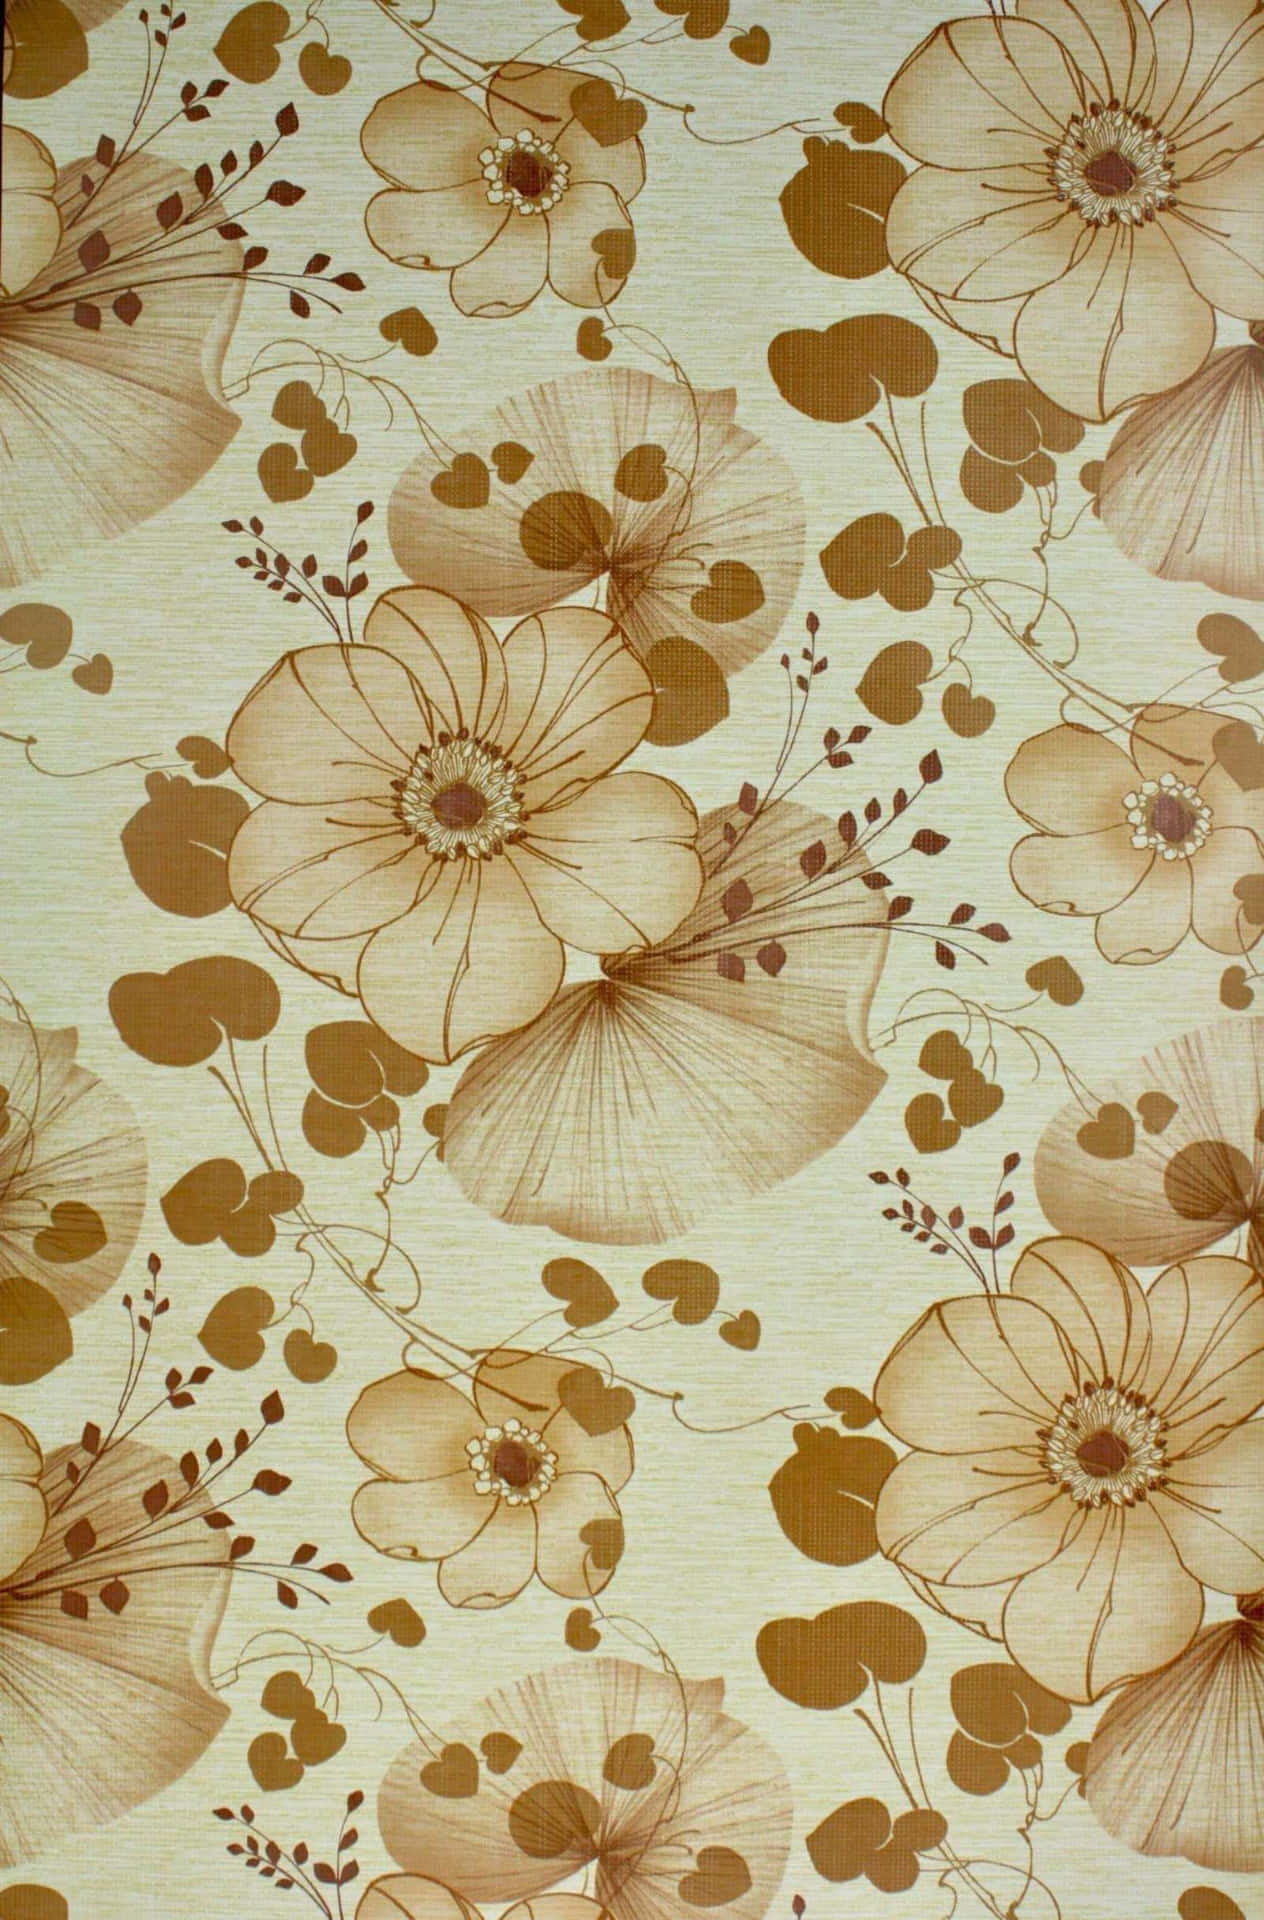 Add a touch of nostalgia to your space with this unforgettable 70s Floral print! Wallpaper